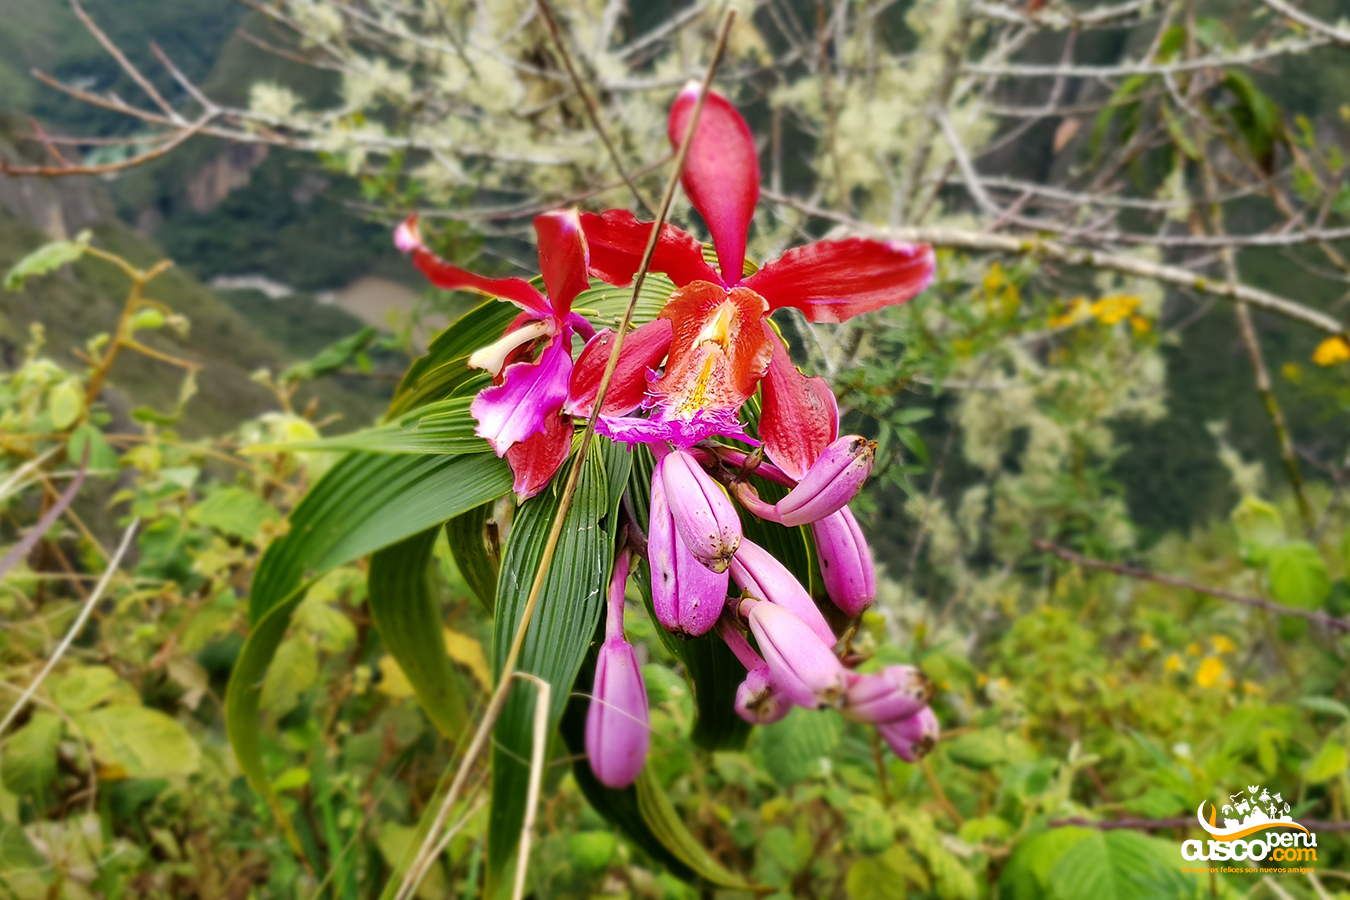 Orchids are also species endangered of extinction. Source: CuscoPeru.com